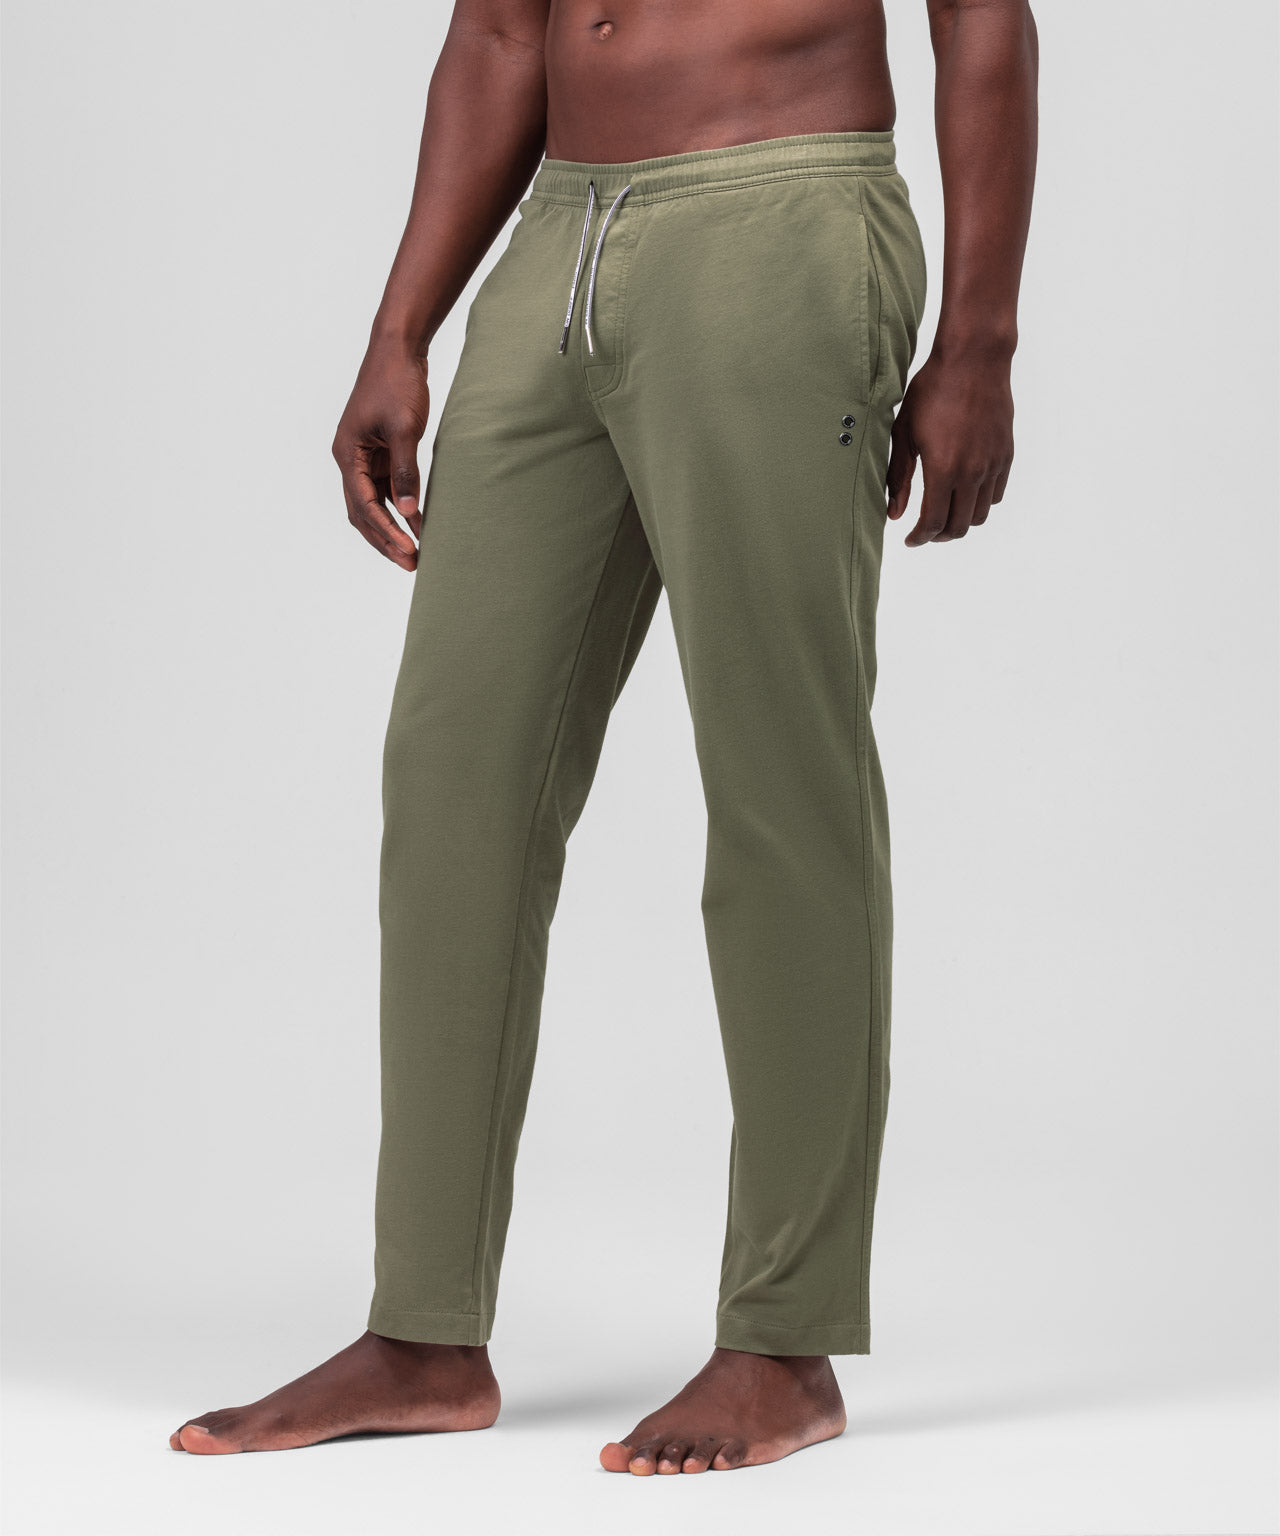 Cotton Home Pants: Olive Green